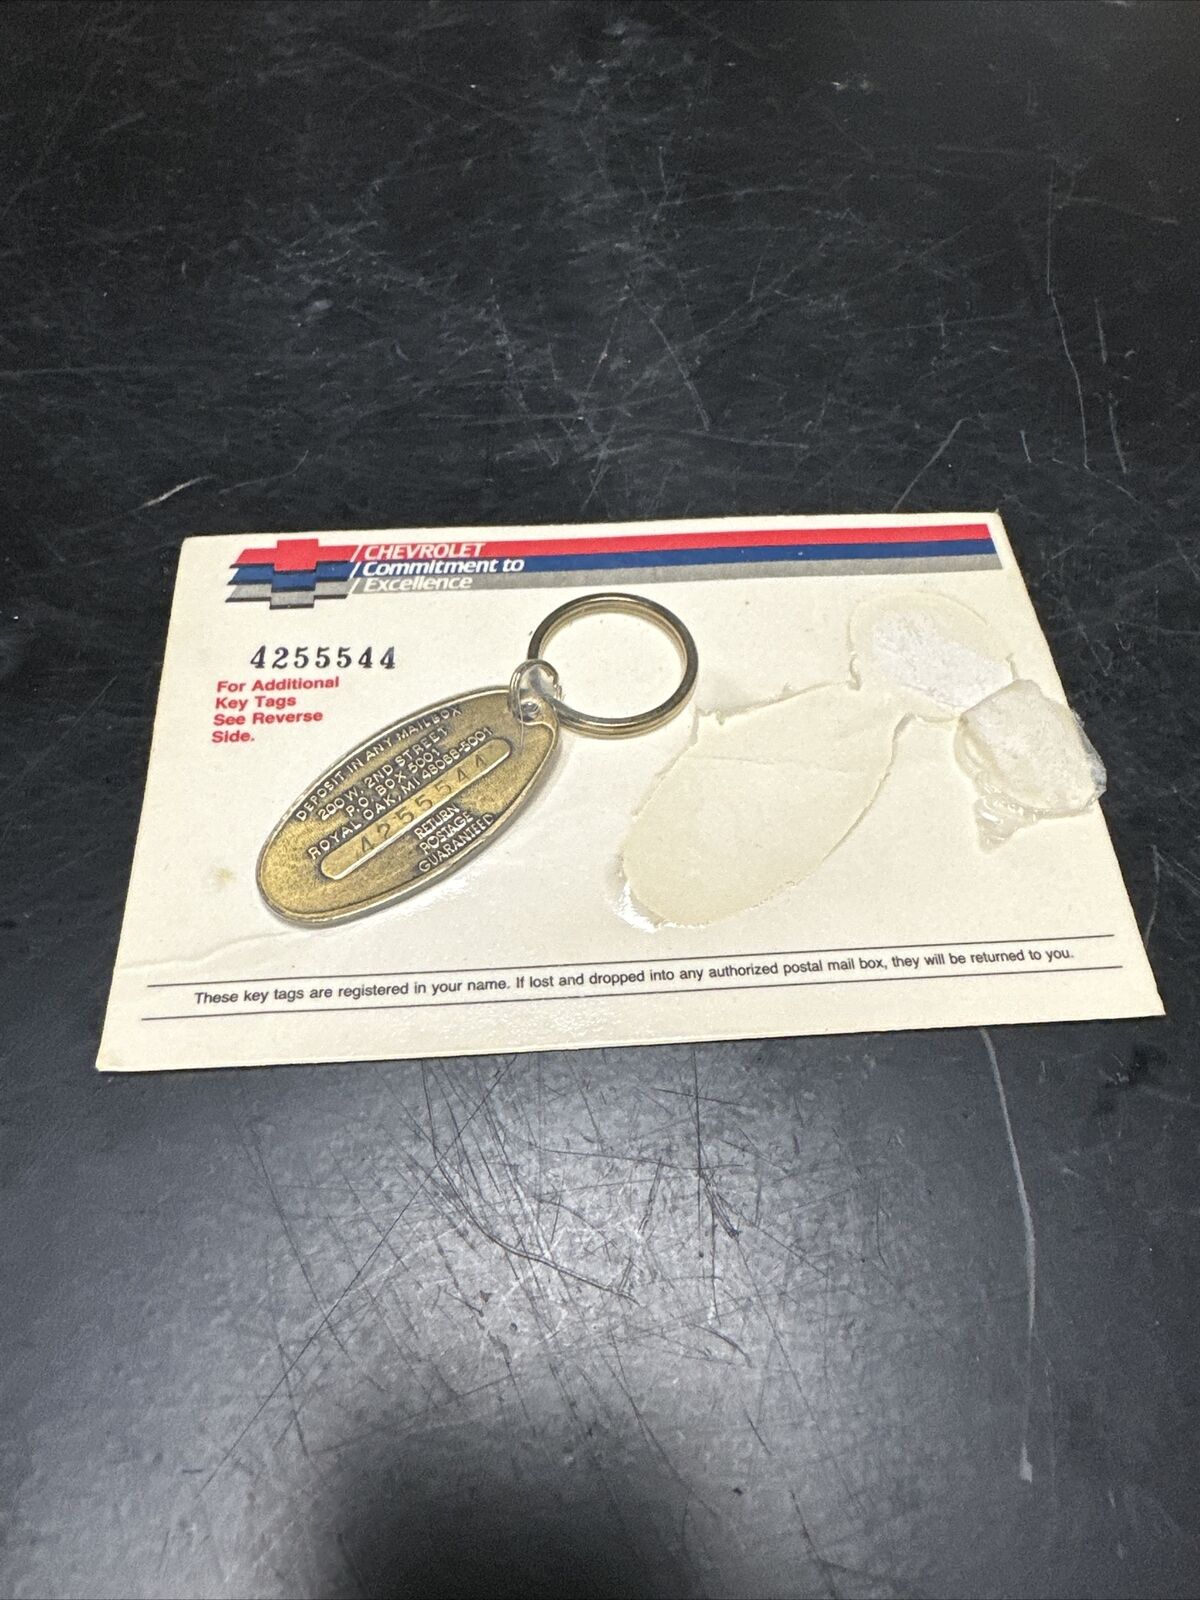 Chevrolet brass key ring tag Commitment to Excellence registered, postage return